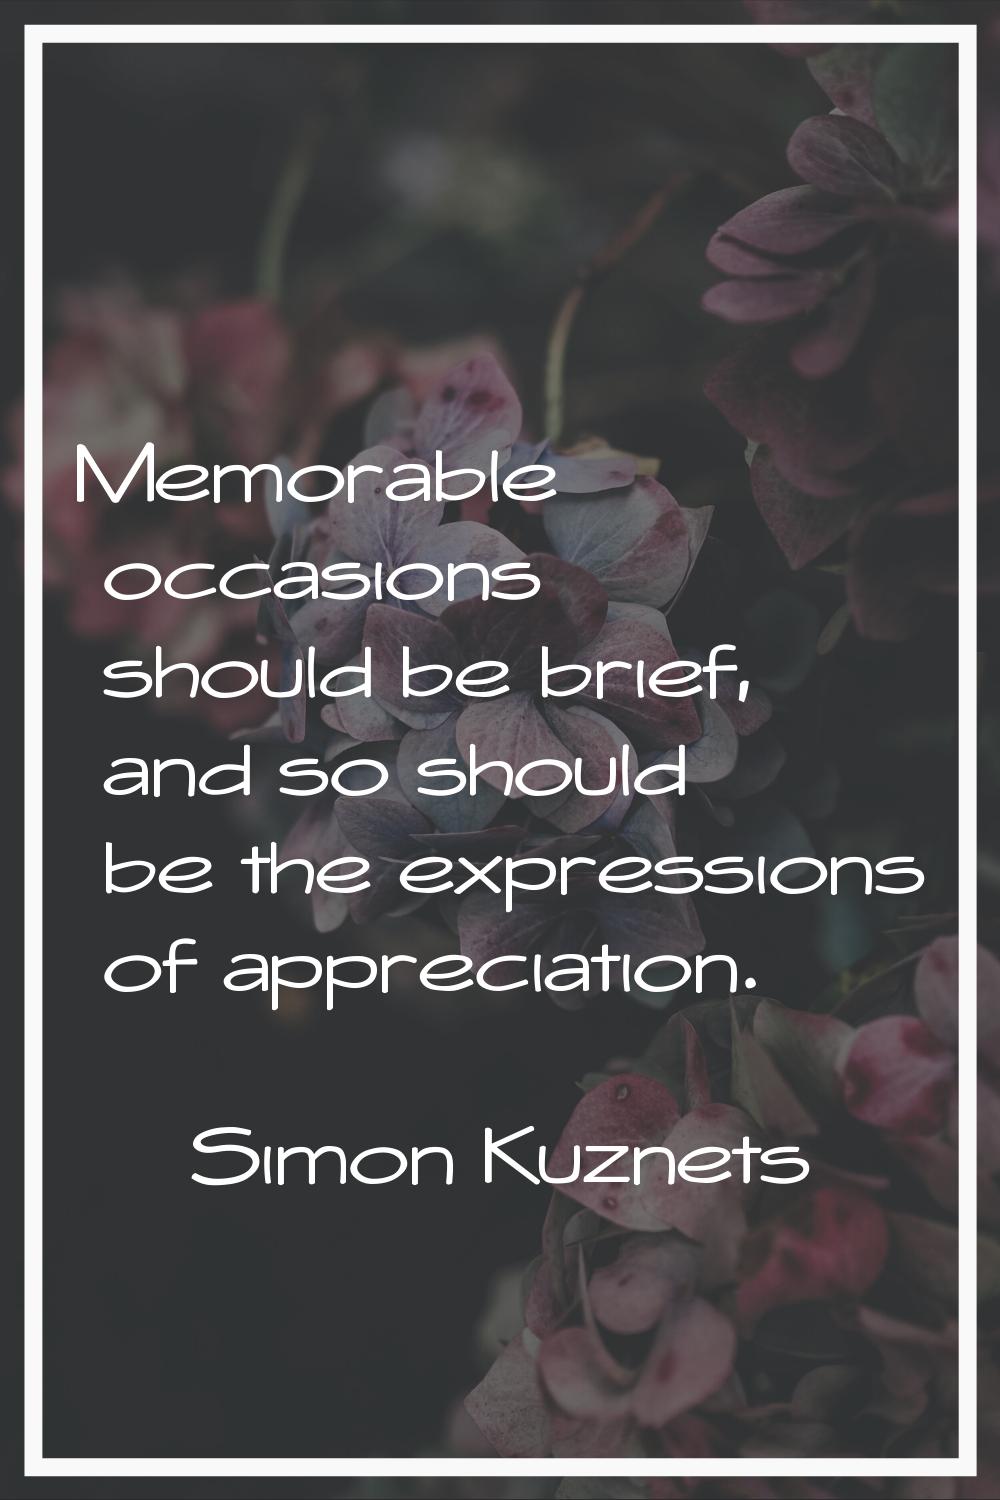 Memorable occasions should be brief, and so should be the expressions of appreciation.